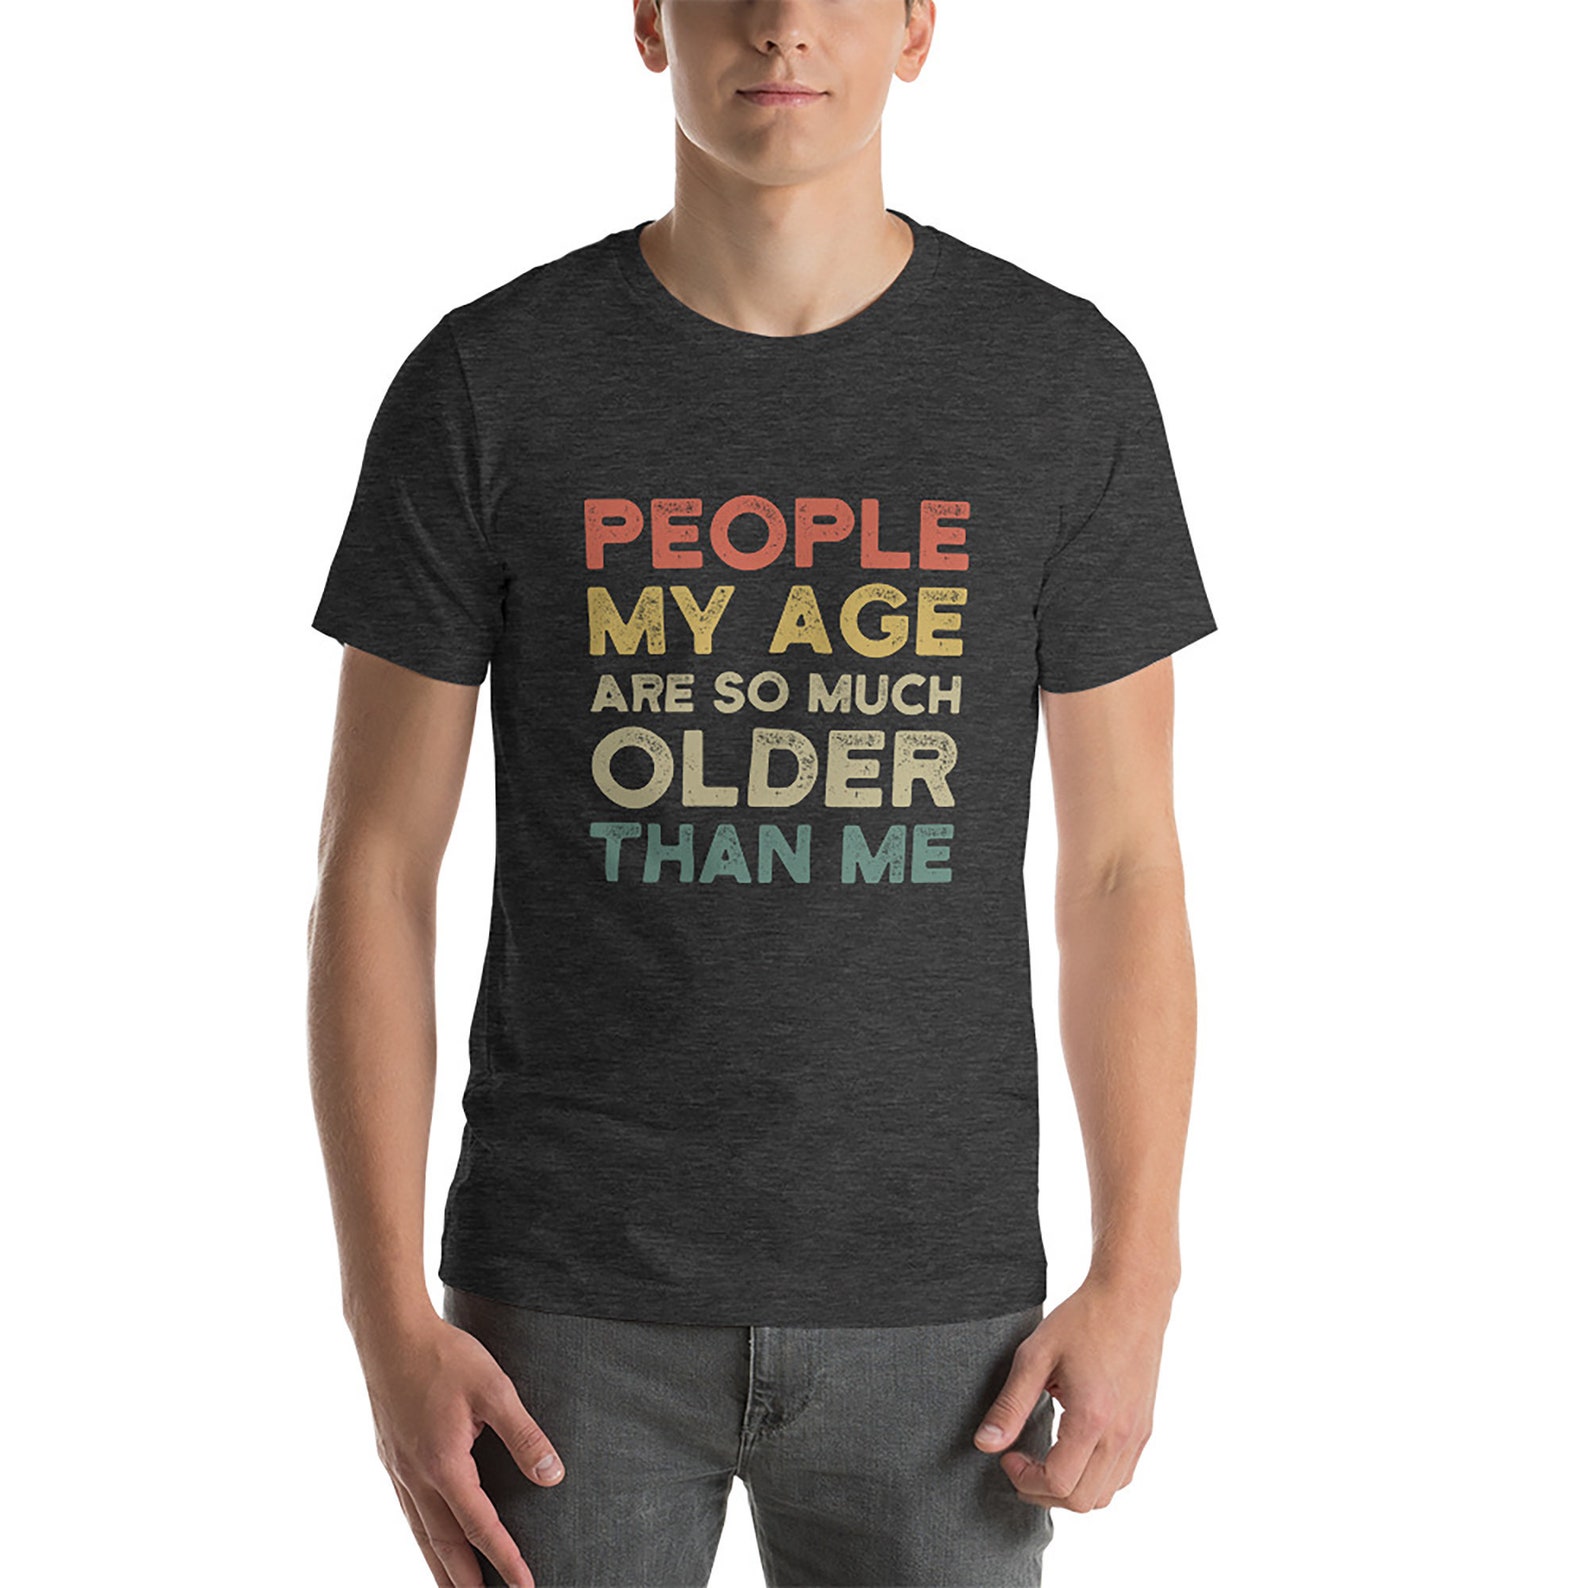 People my age are so much older than me Shirt Funny birthday | Etsy